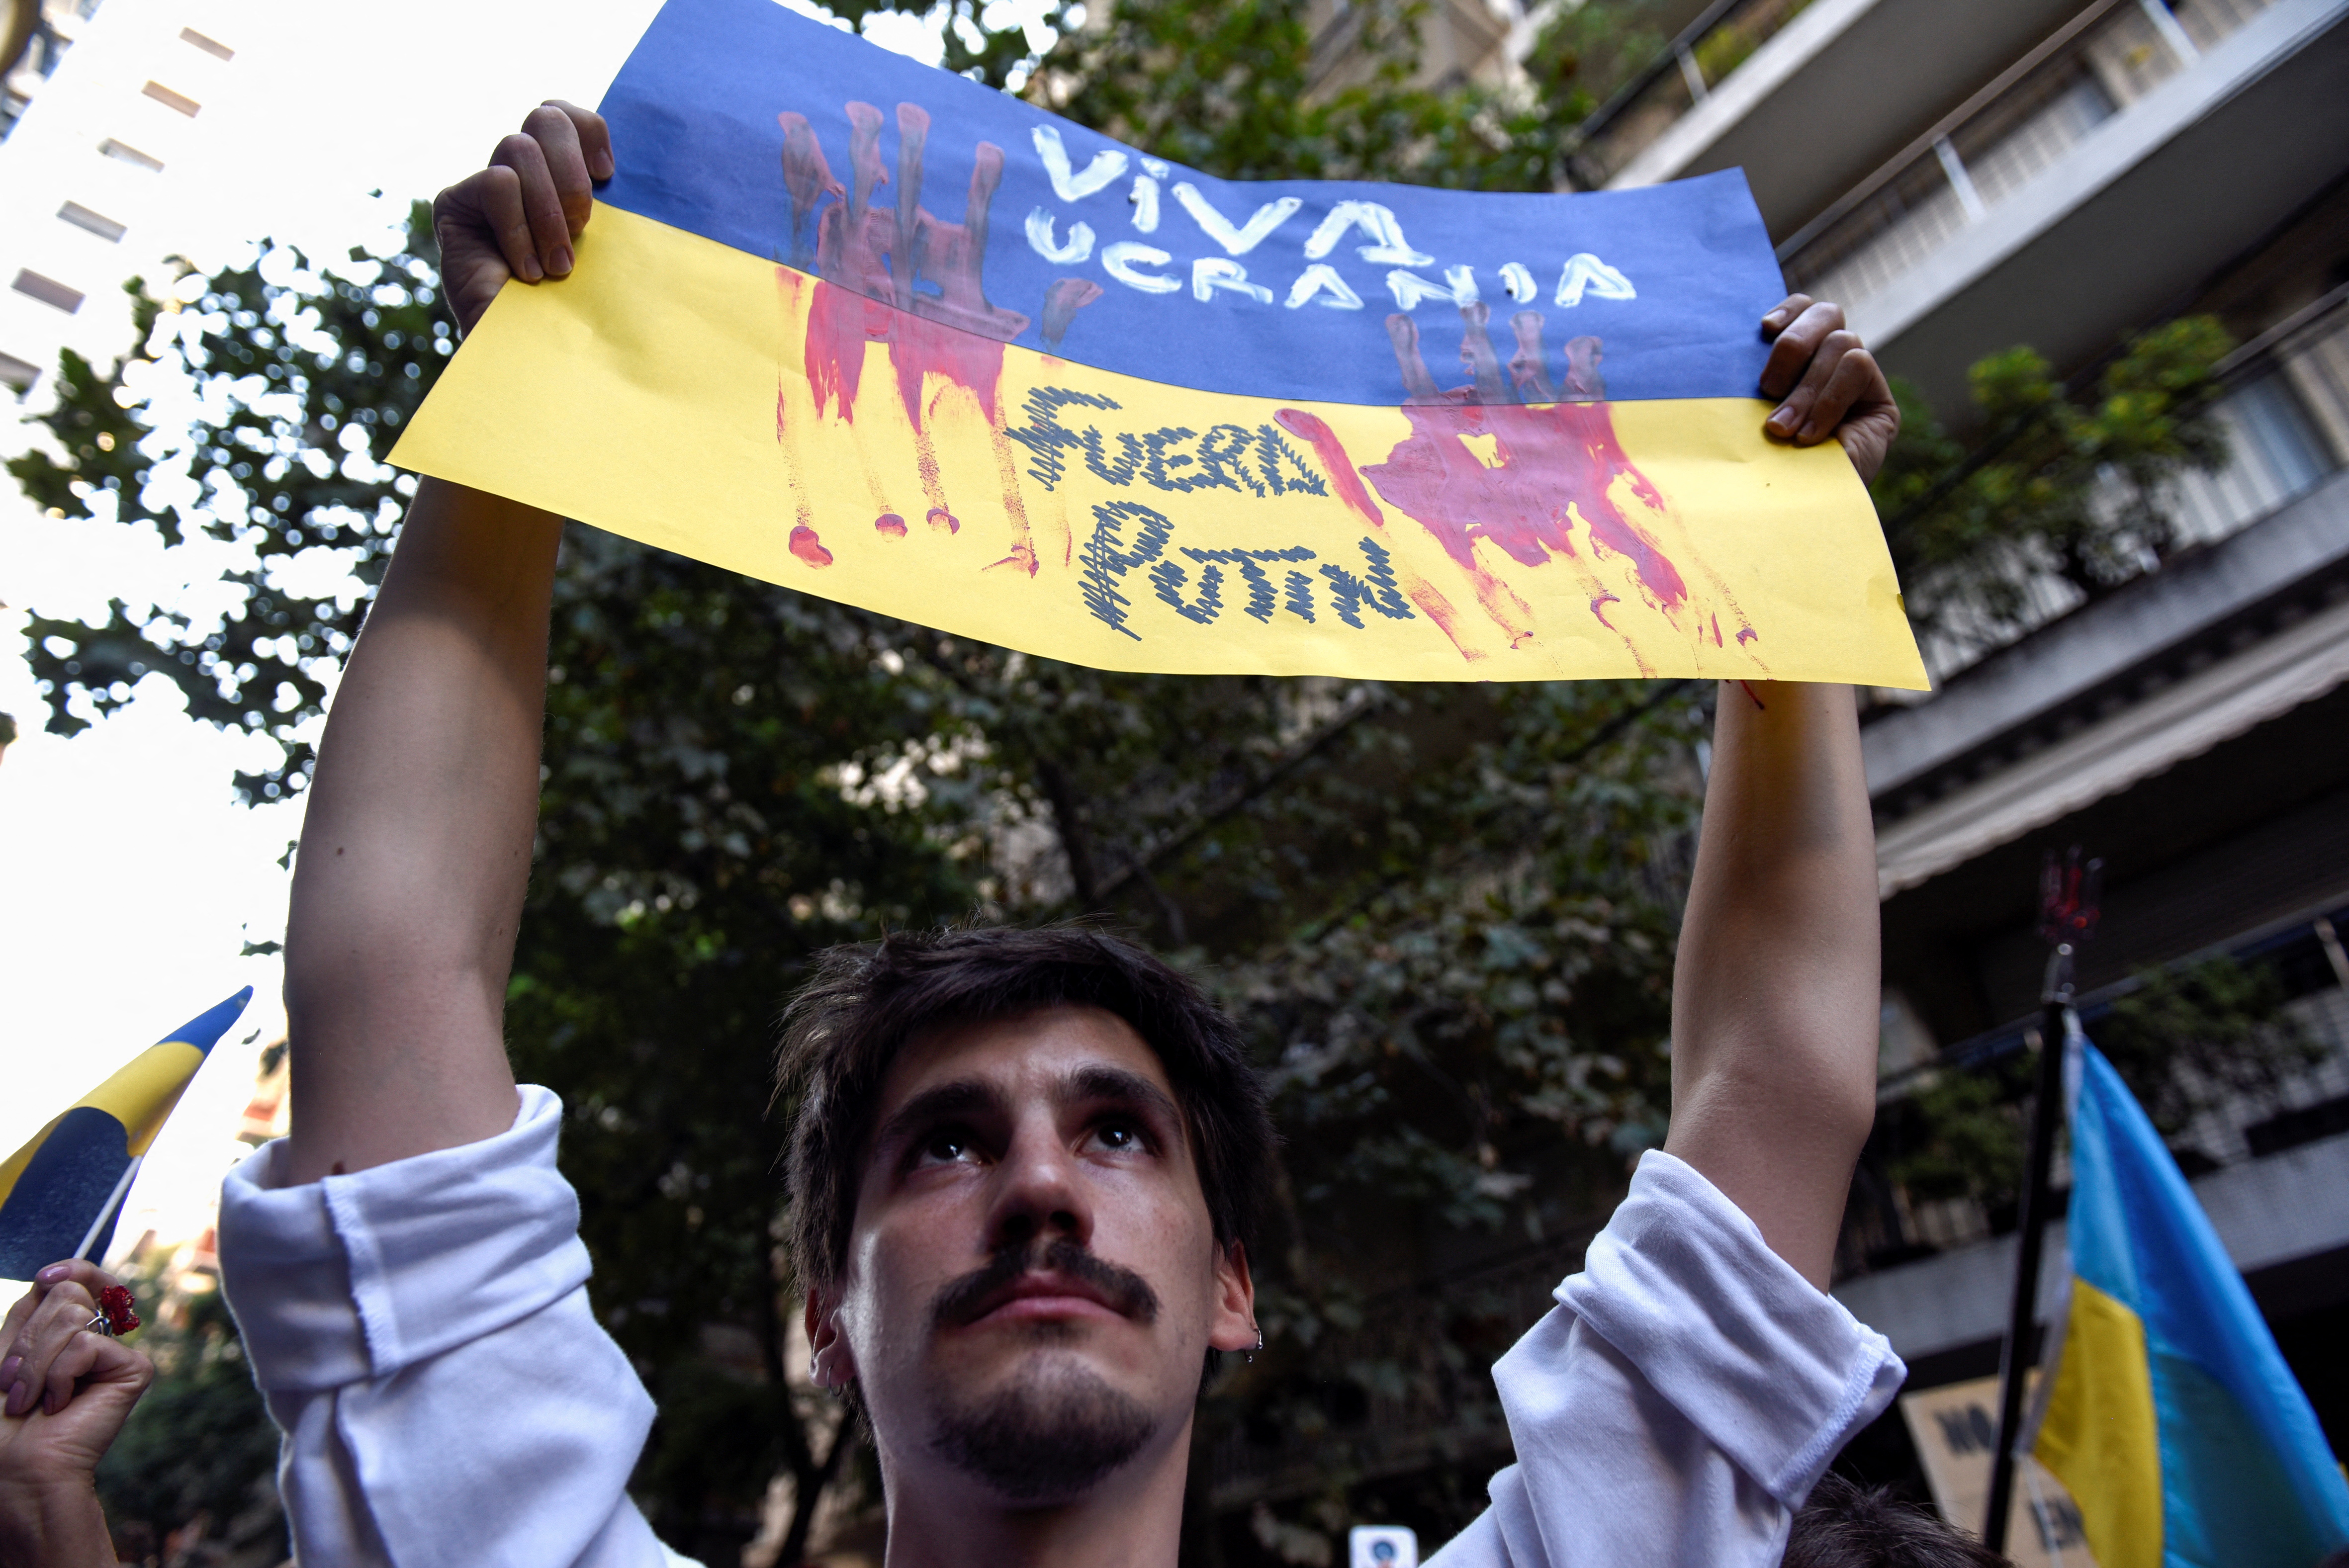 She woke up with bombs': Ukrainian diasporas in Latin America protest  invasion | Reuters